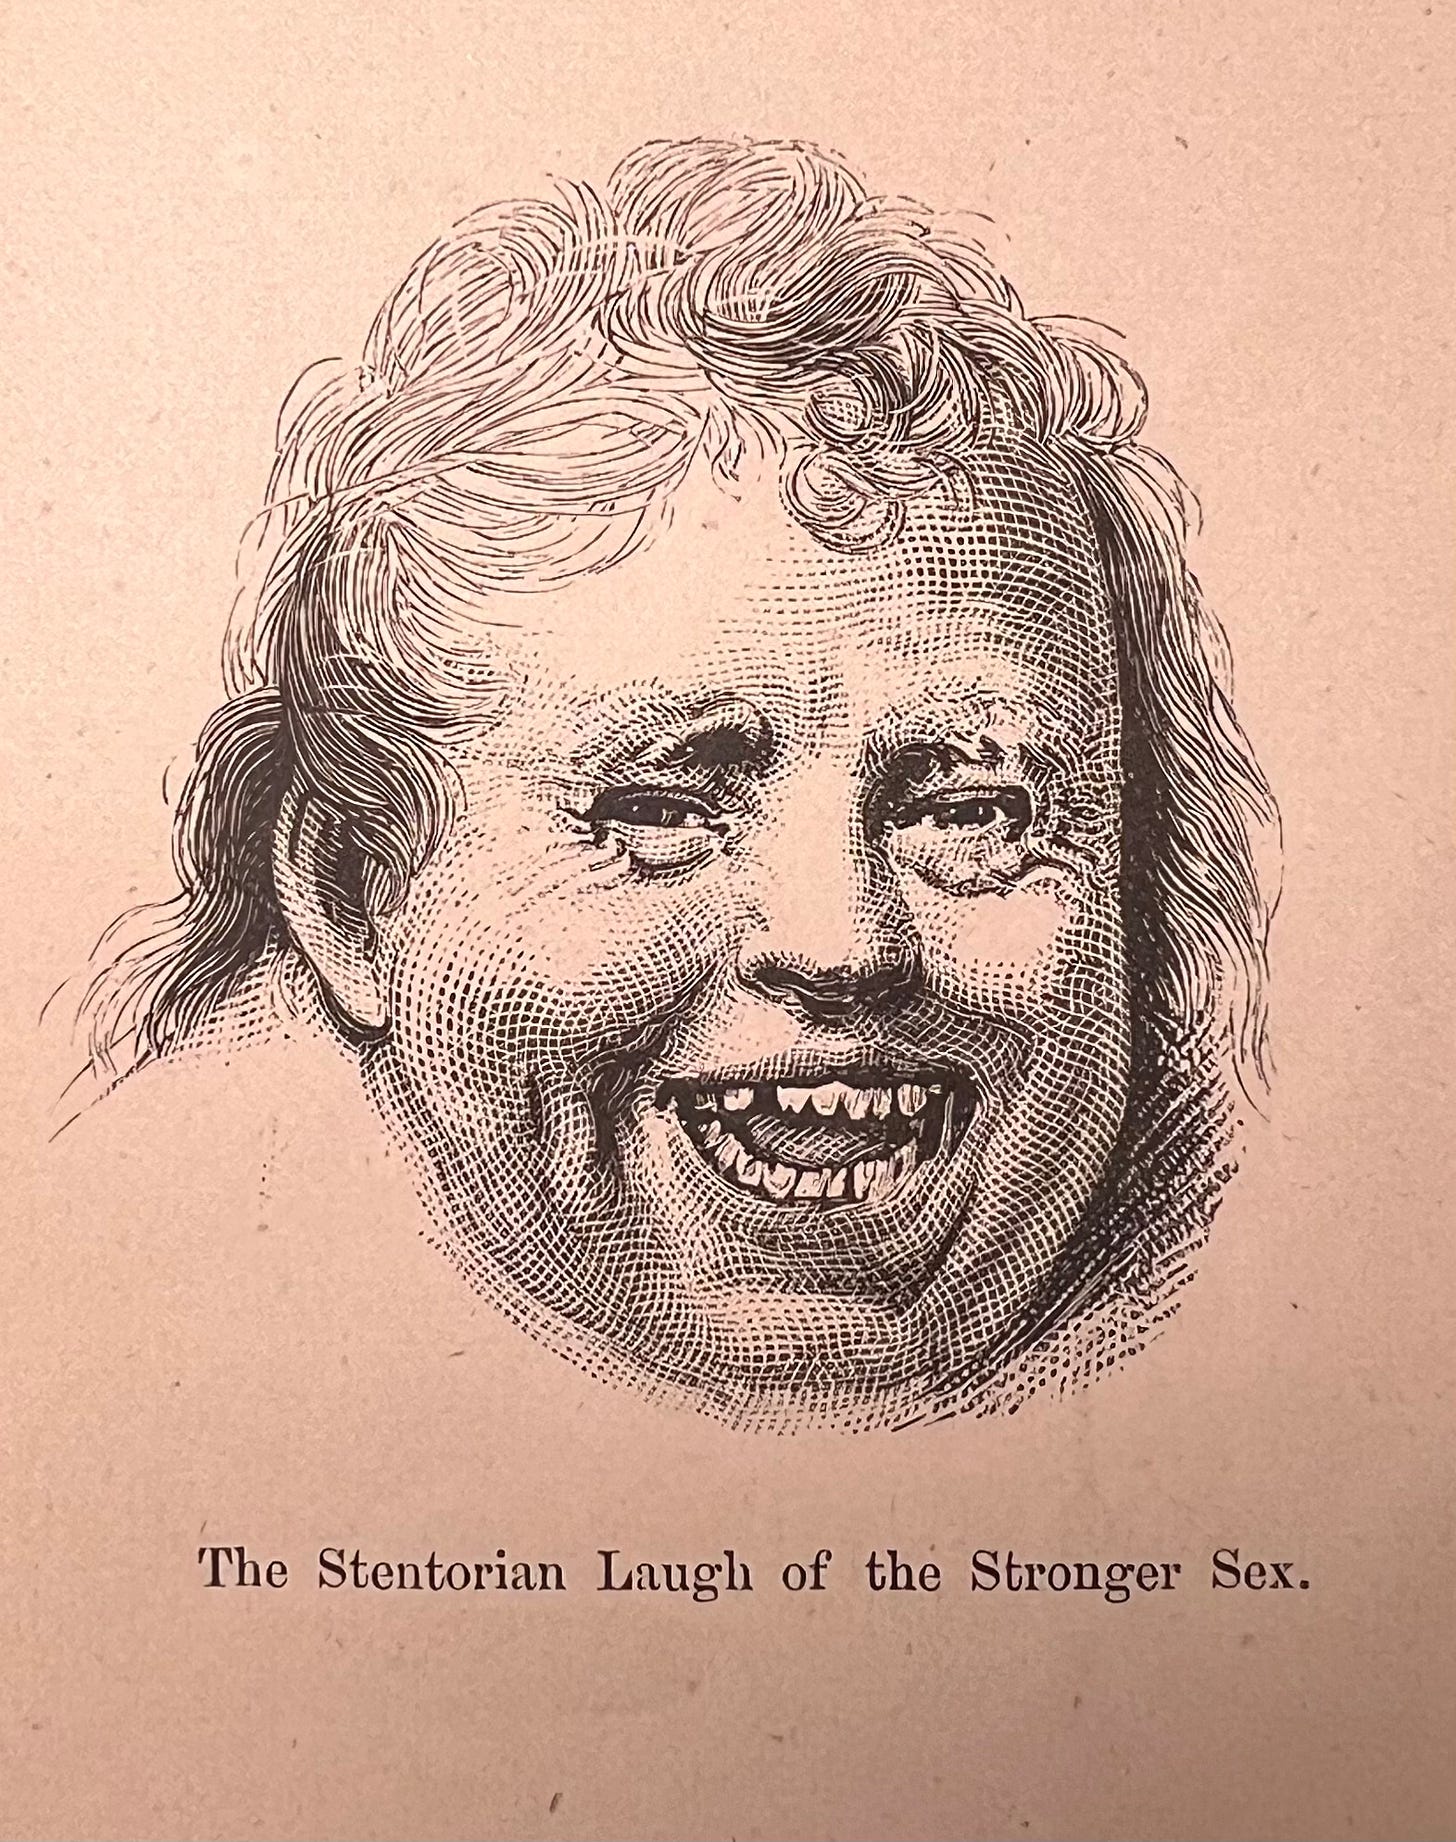 The Stentorian Laugh of the Stronger Sex